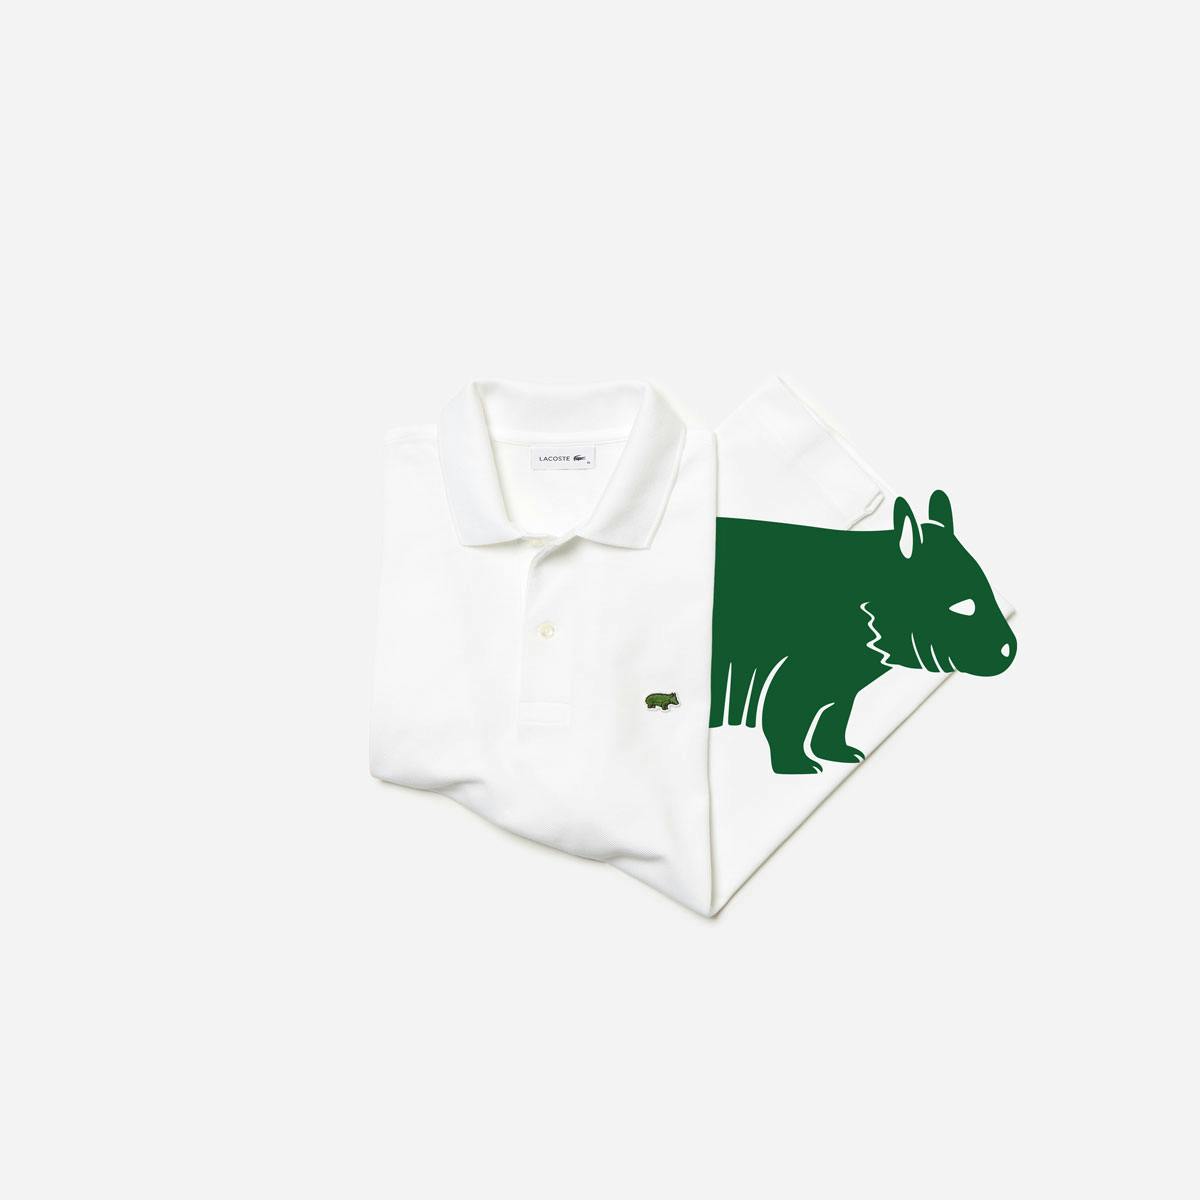 Lacoste Limited Edition Endangered Species | museosdelima.com